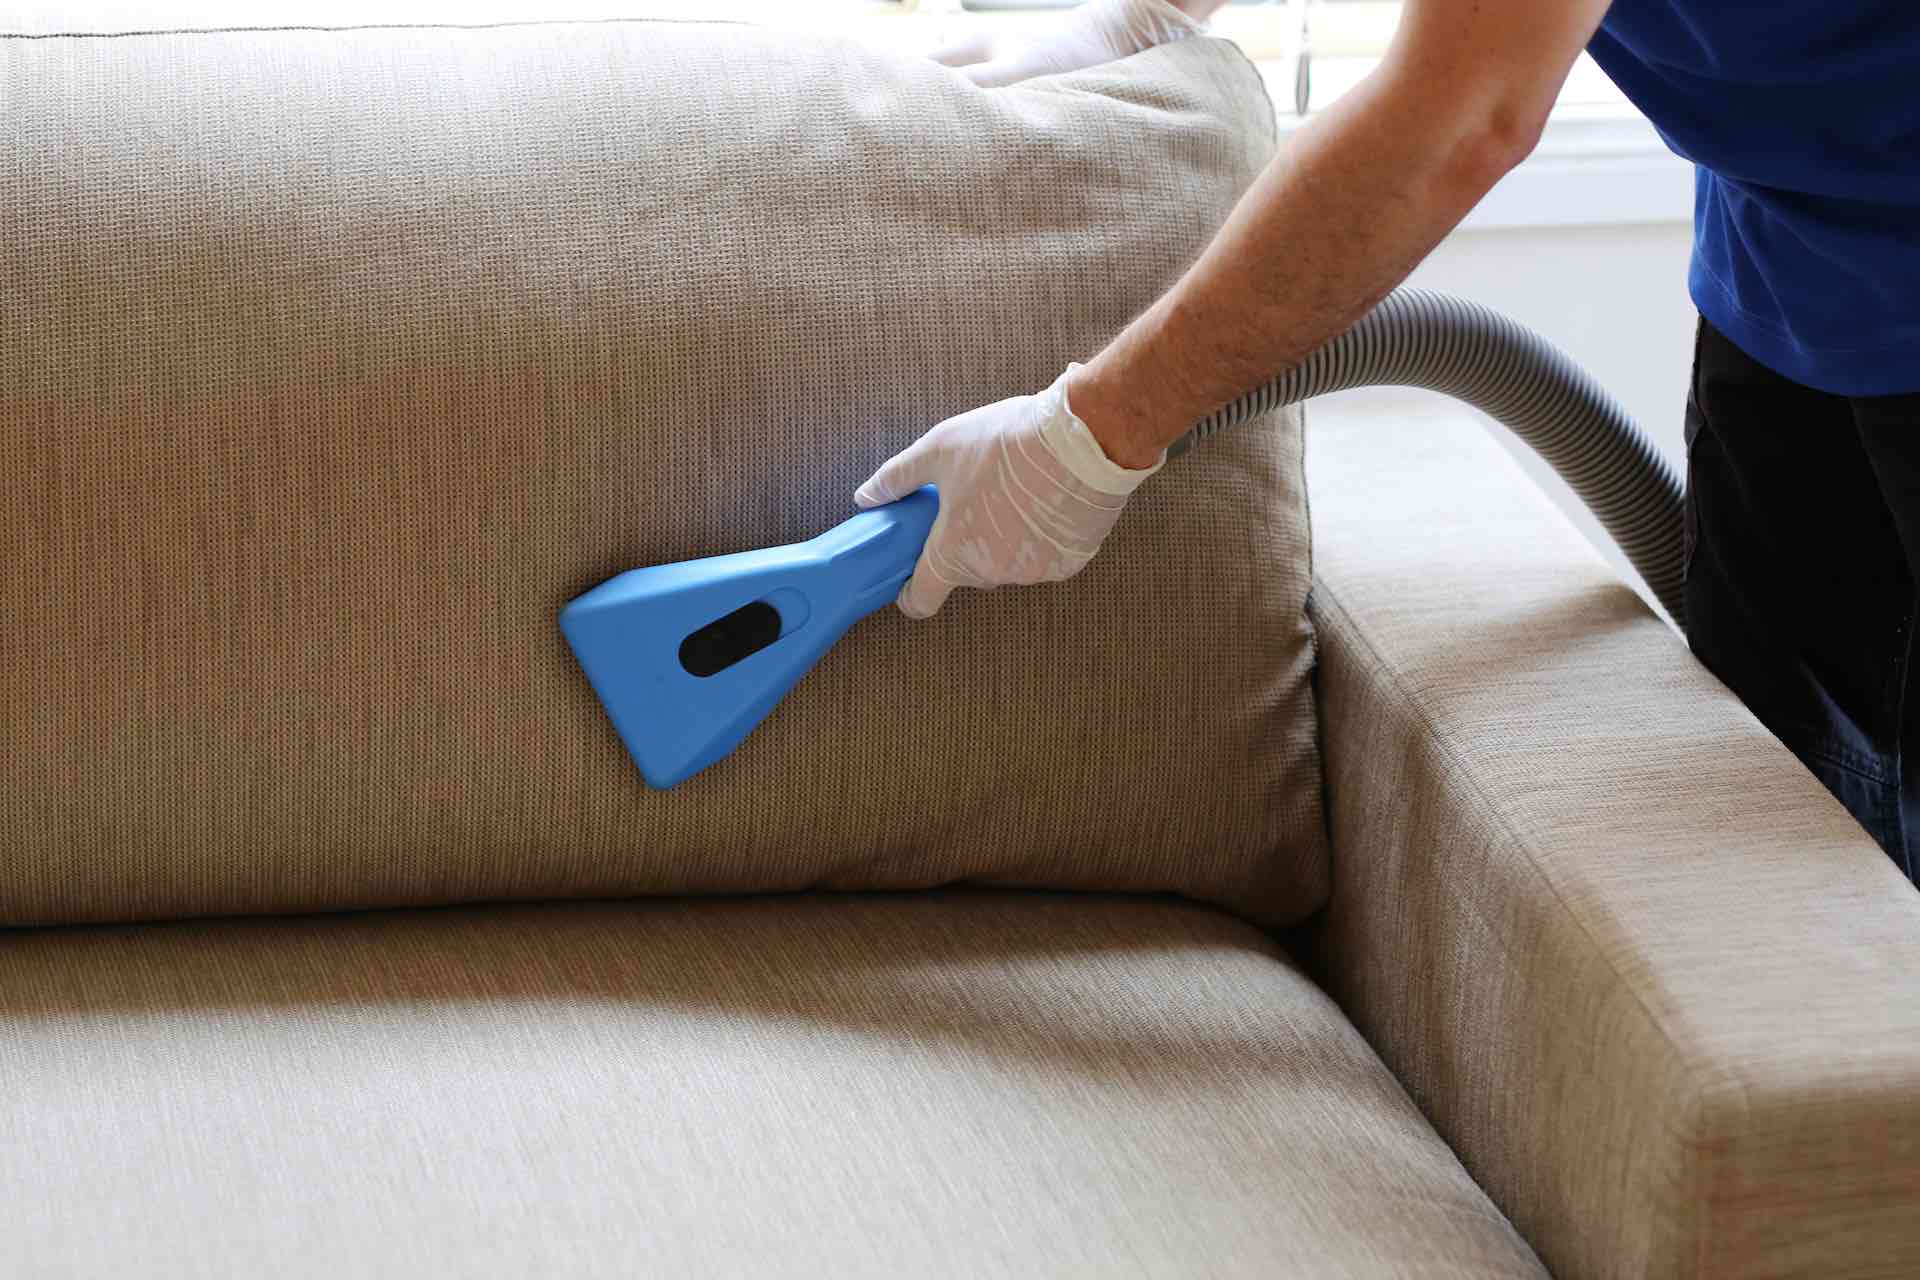 How to Clean Leather Upholstery
